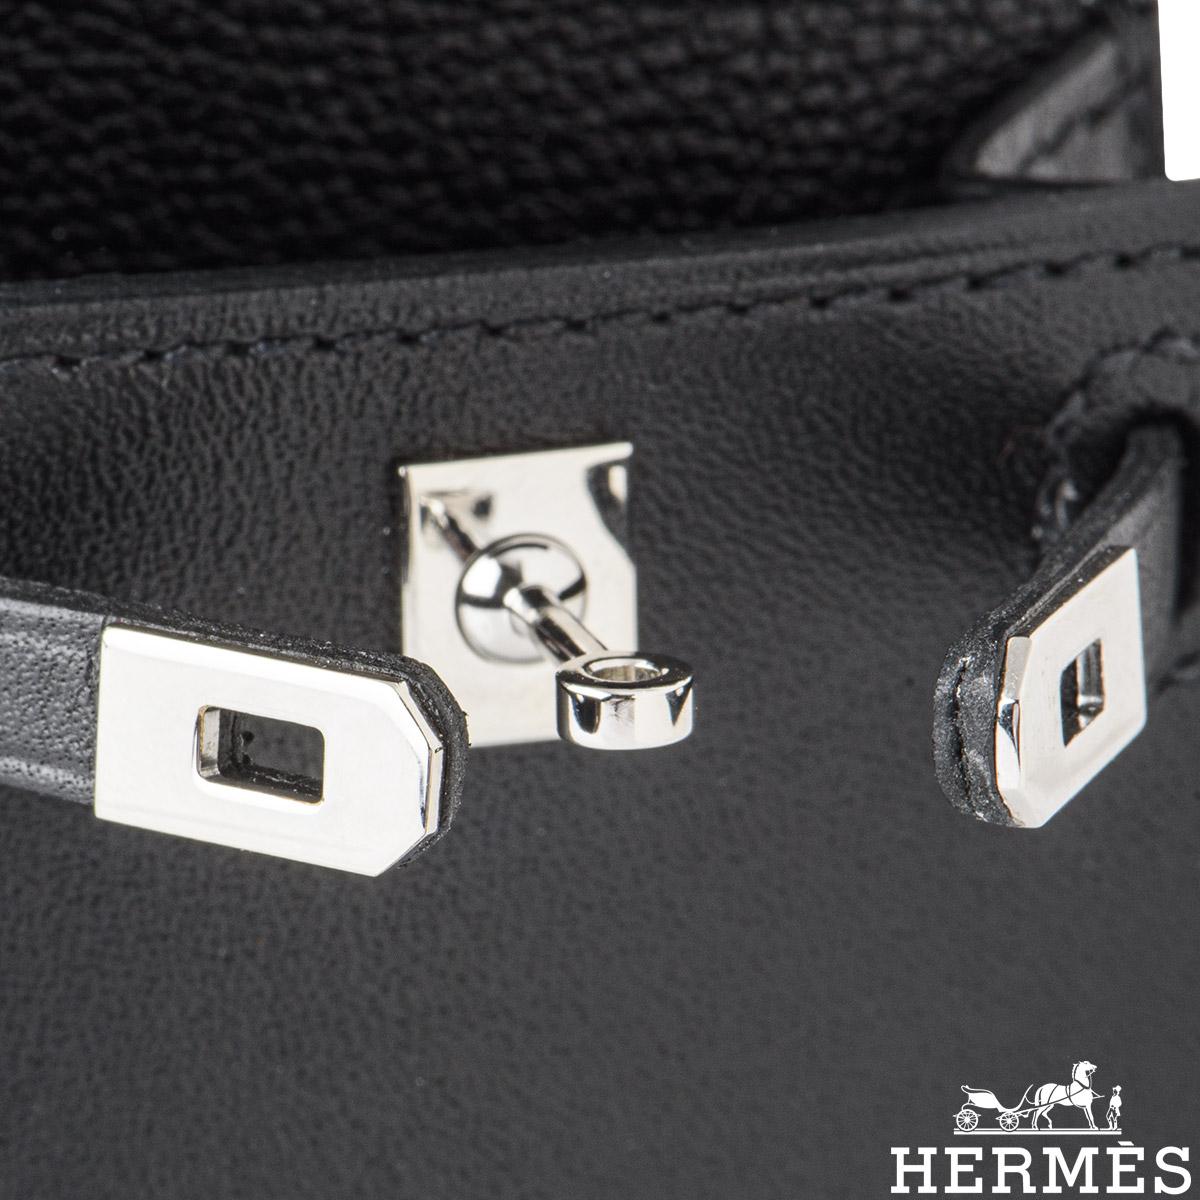 Hermès Noir Mini Kelly Twilly Bag Charm In Excellent Condition For Sale In London, GB